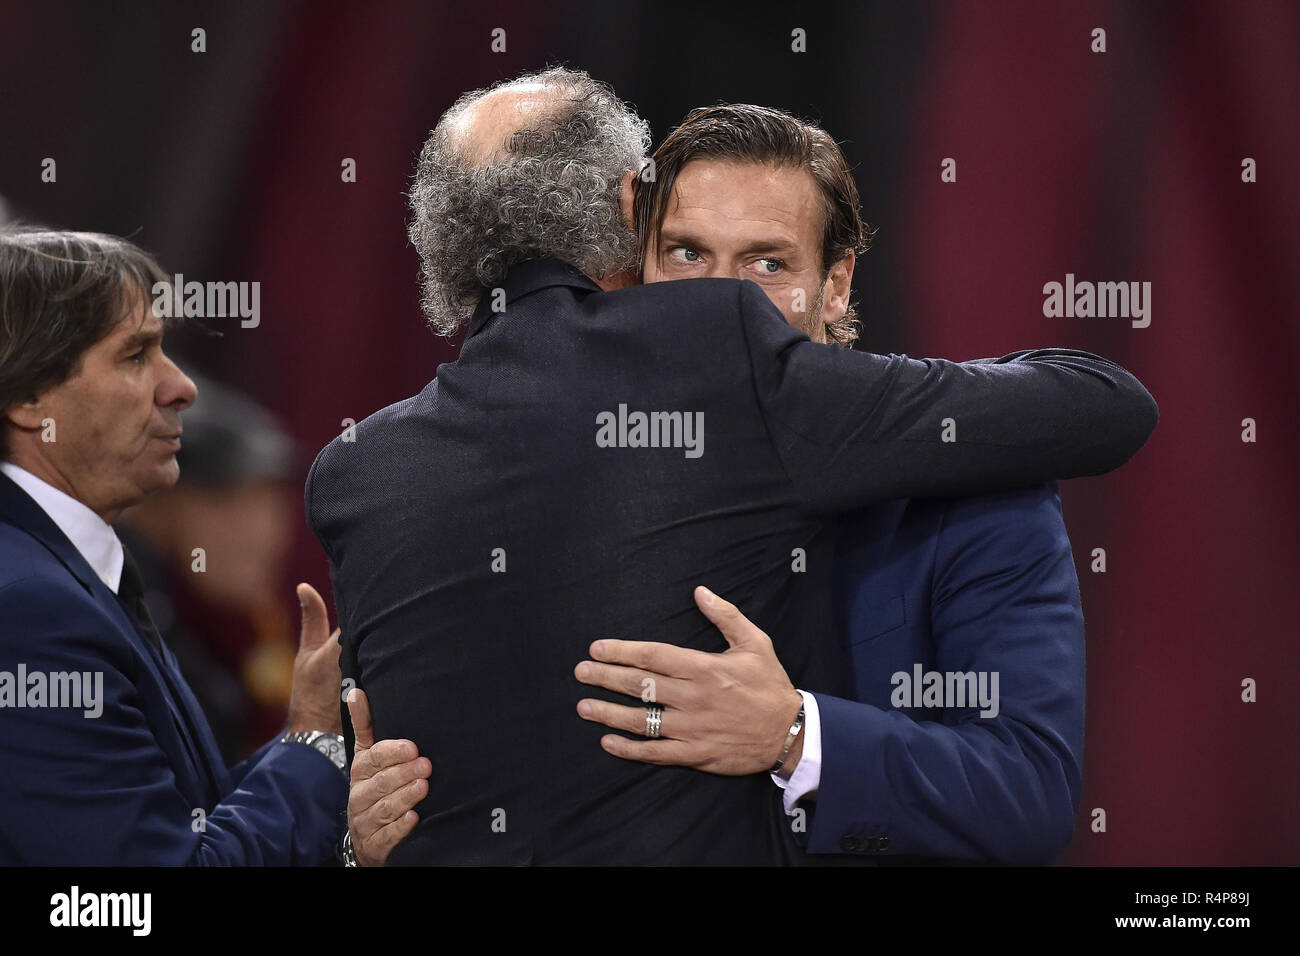 Rome, Italy. 27th Nov 2018. AS Roma former player Francesco Totti hugs AS Roma former player Paulo Roberto Falcao before the UEFA Champions League match between Roma and Real Madrid at Stadio Olimpico, Rome, Italy on 27 November 2018. Credit: Giuseppe Maffia/Alamy Live News Stock Photo